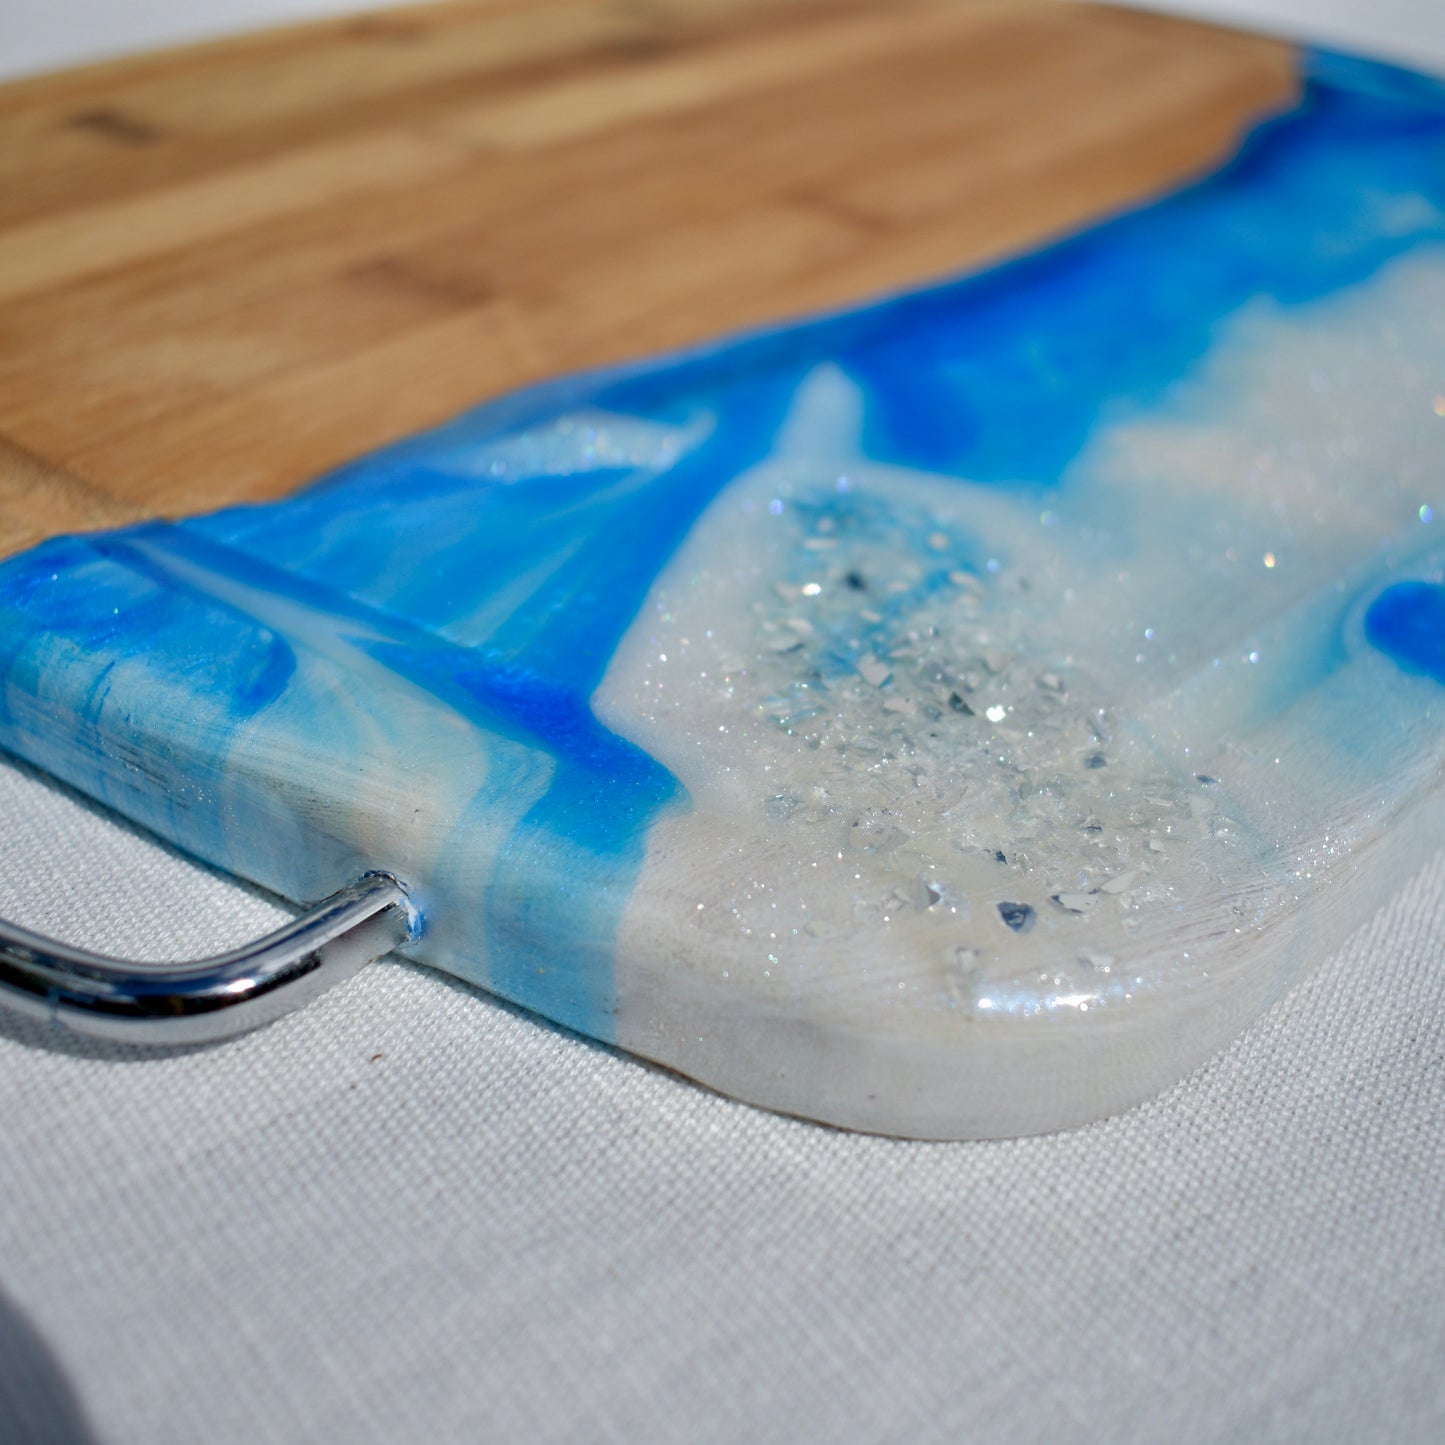 Blue & White Bamboo Charcuterie Board with Metal handles